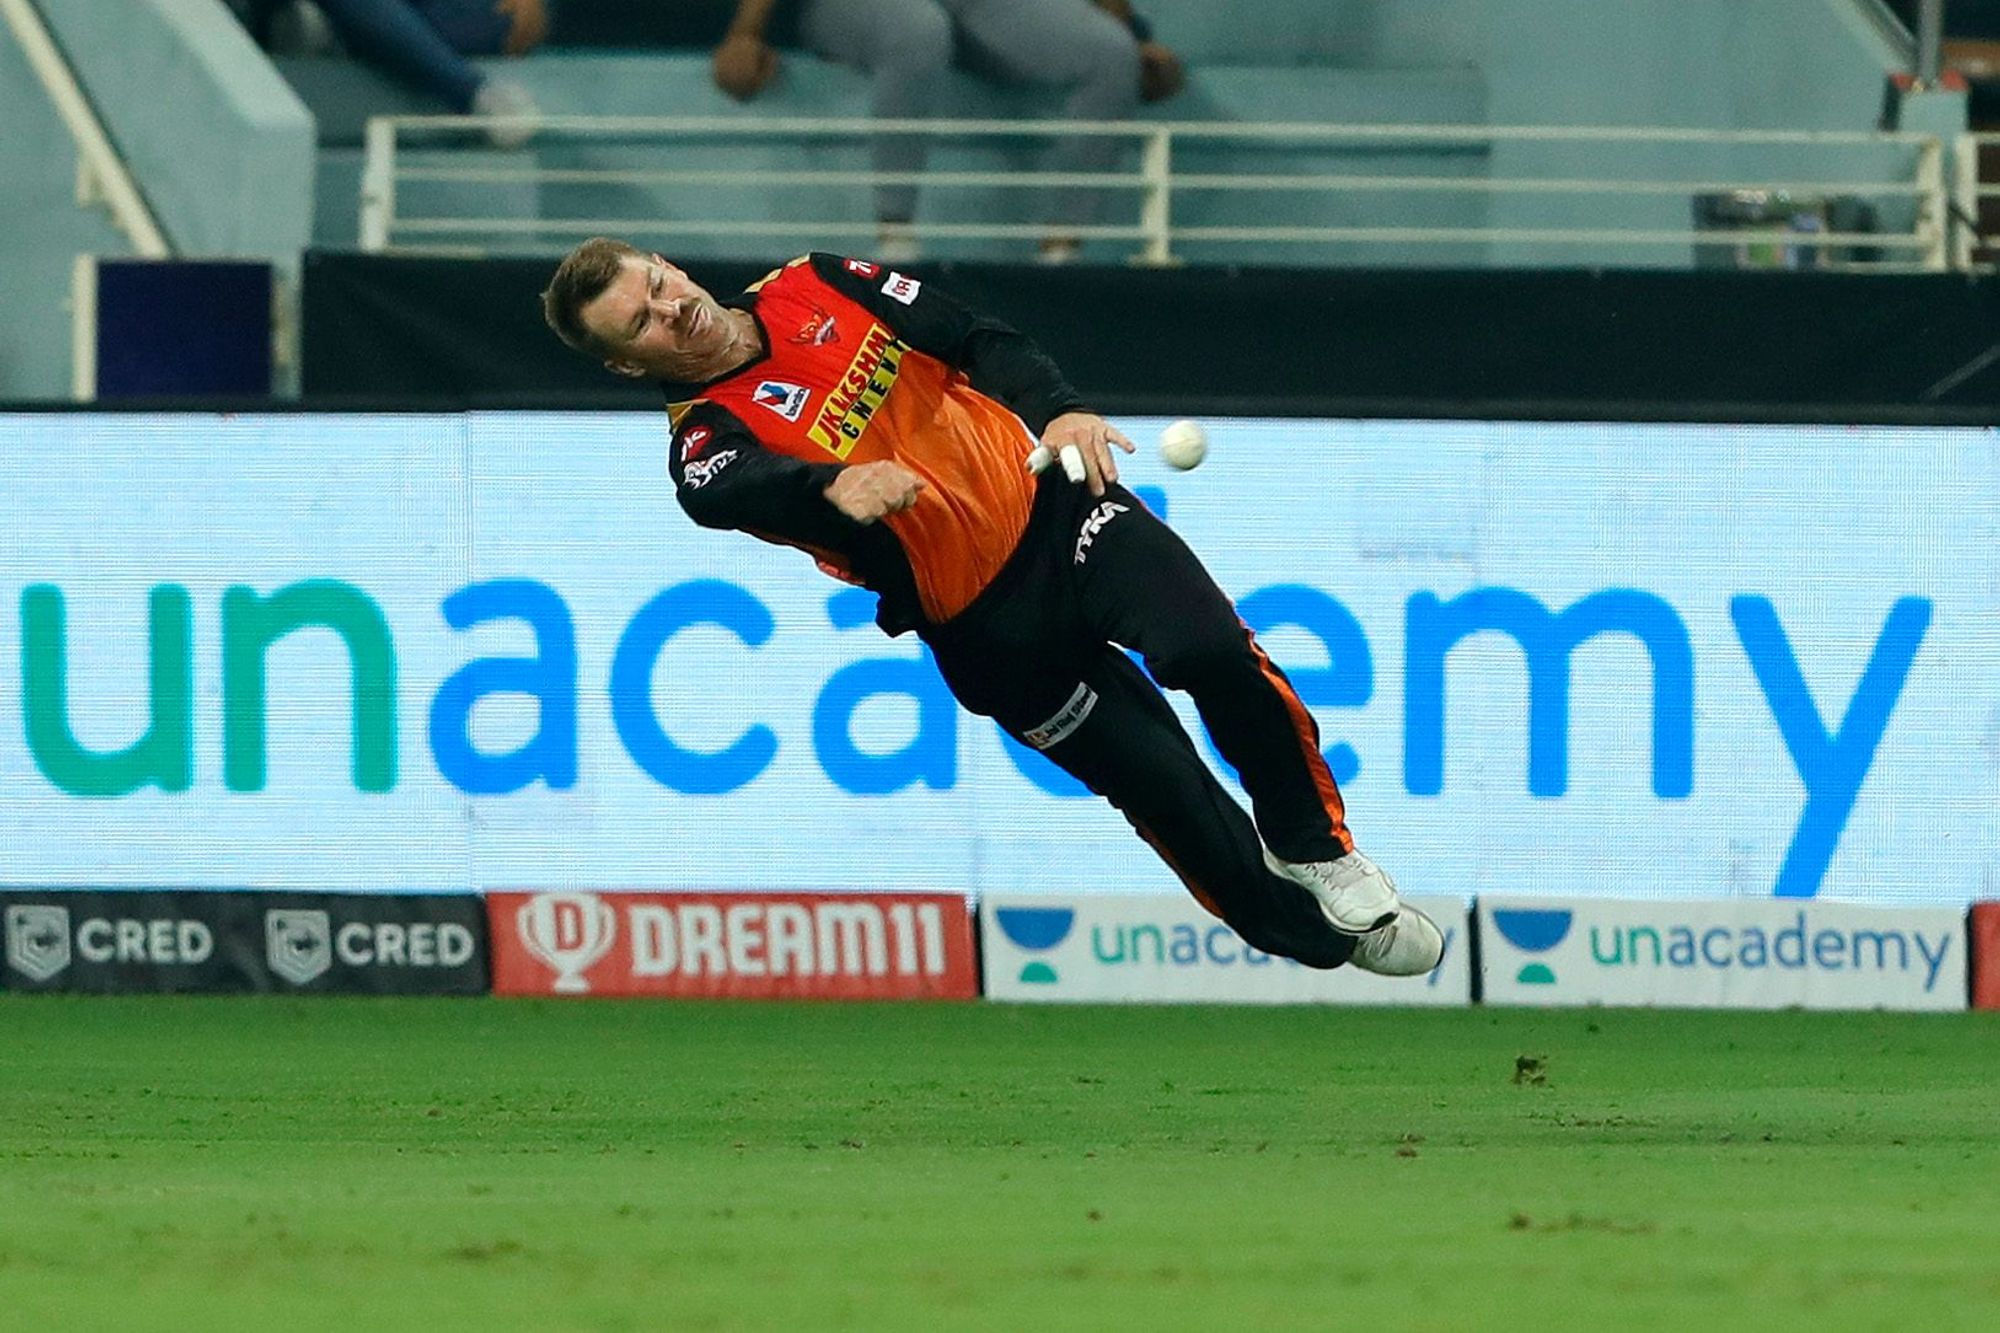 David Warner becomes the first player to register 50 fifty-plus runs in IPL